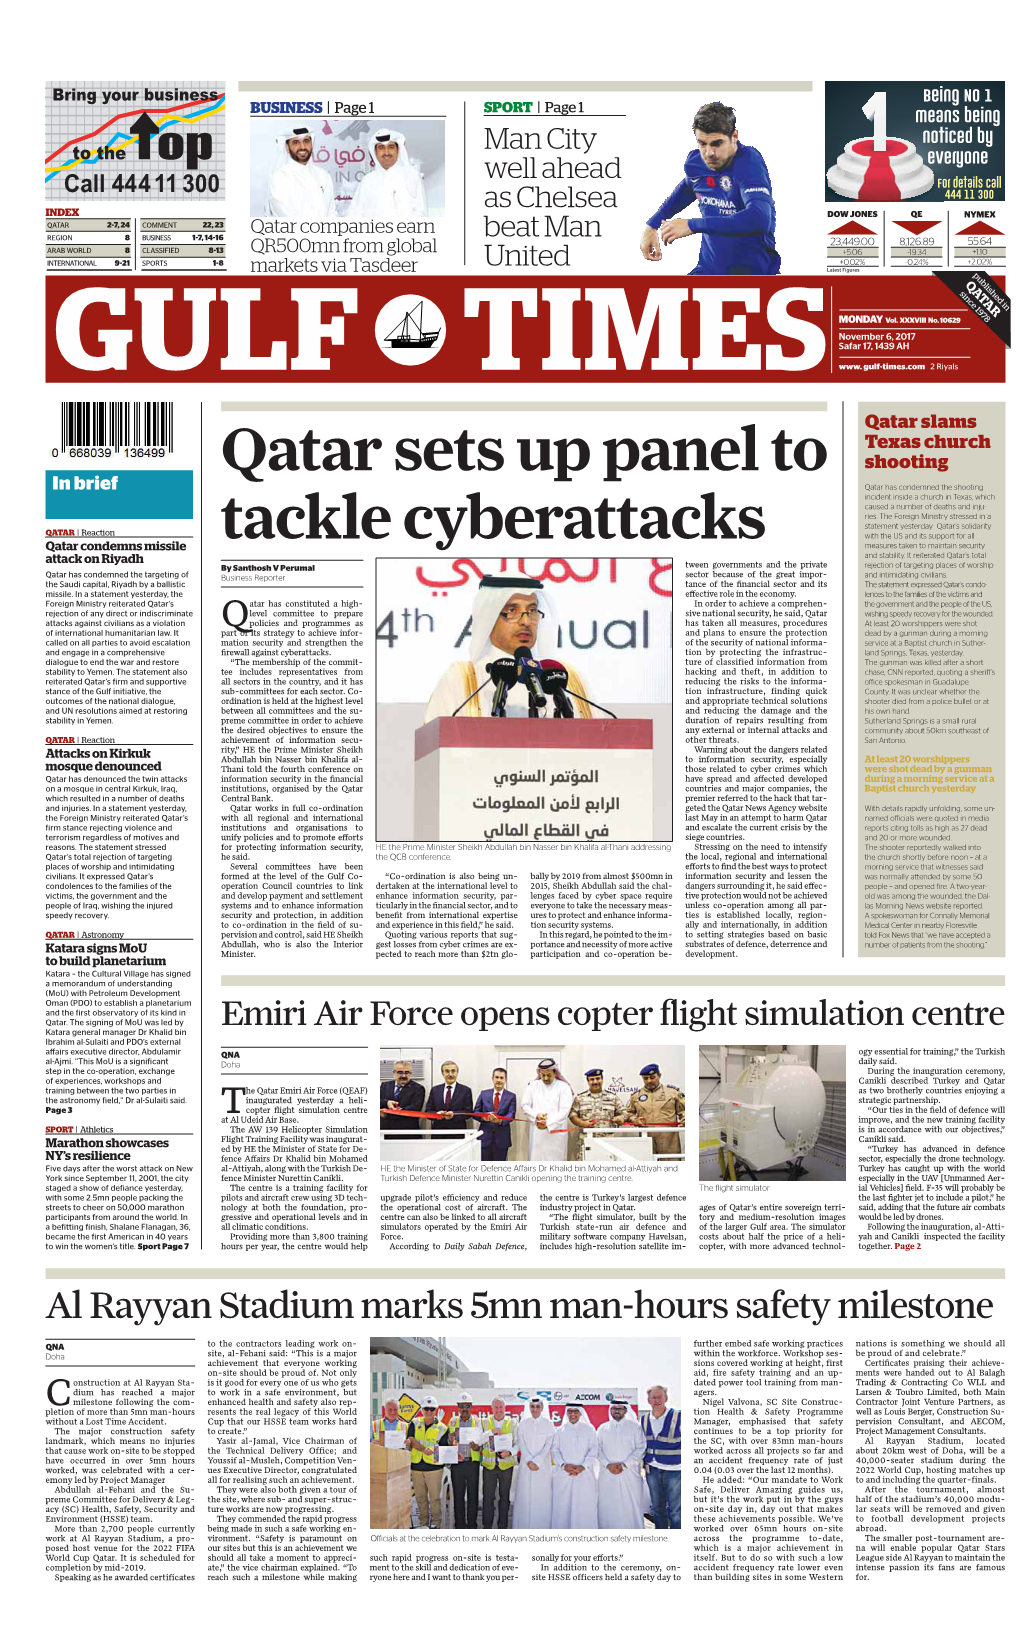 Qatar Sets up Panel to Tackle Cyberattacks